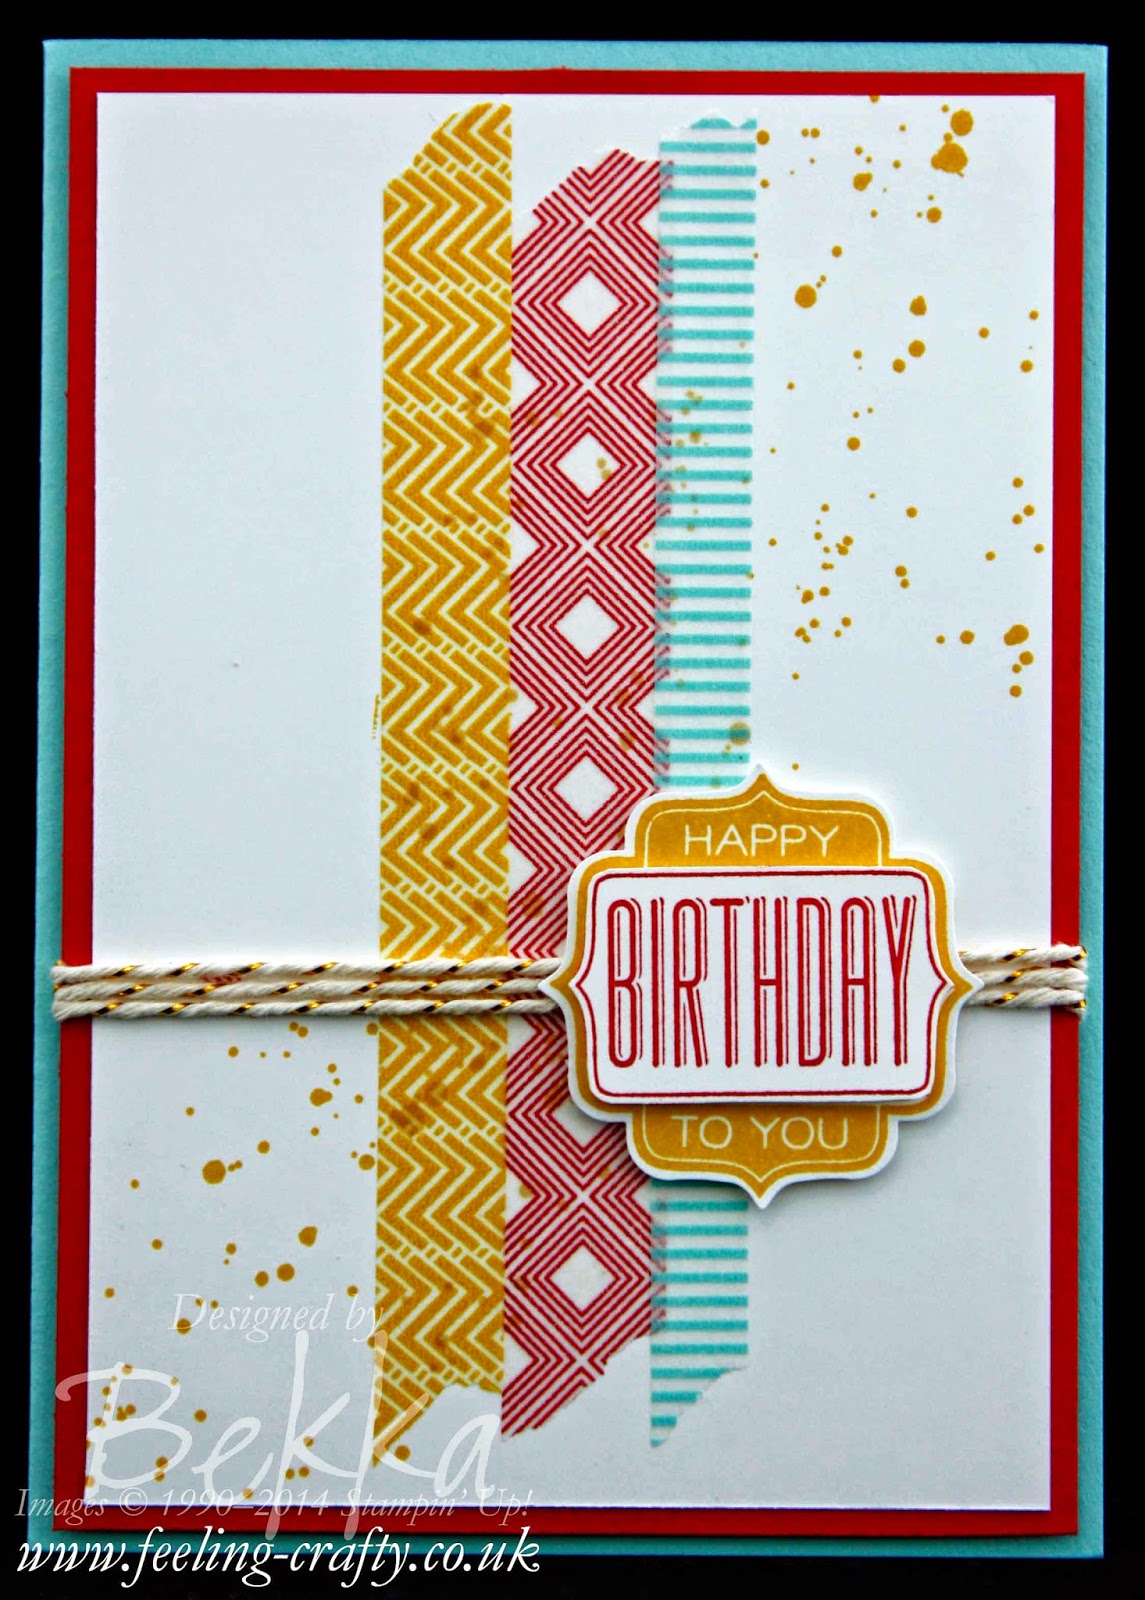 Birthday Card for a Man using Tag talk from Stampin' Up! UK Independent Demonstrator Bekka - check her blog for lots of great ideas